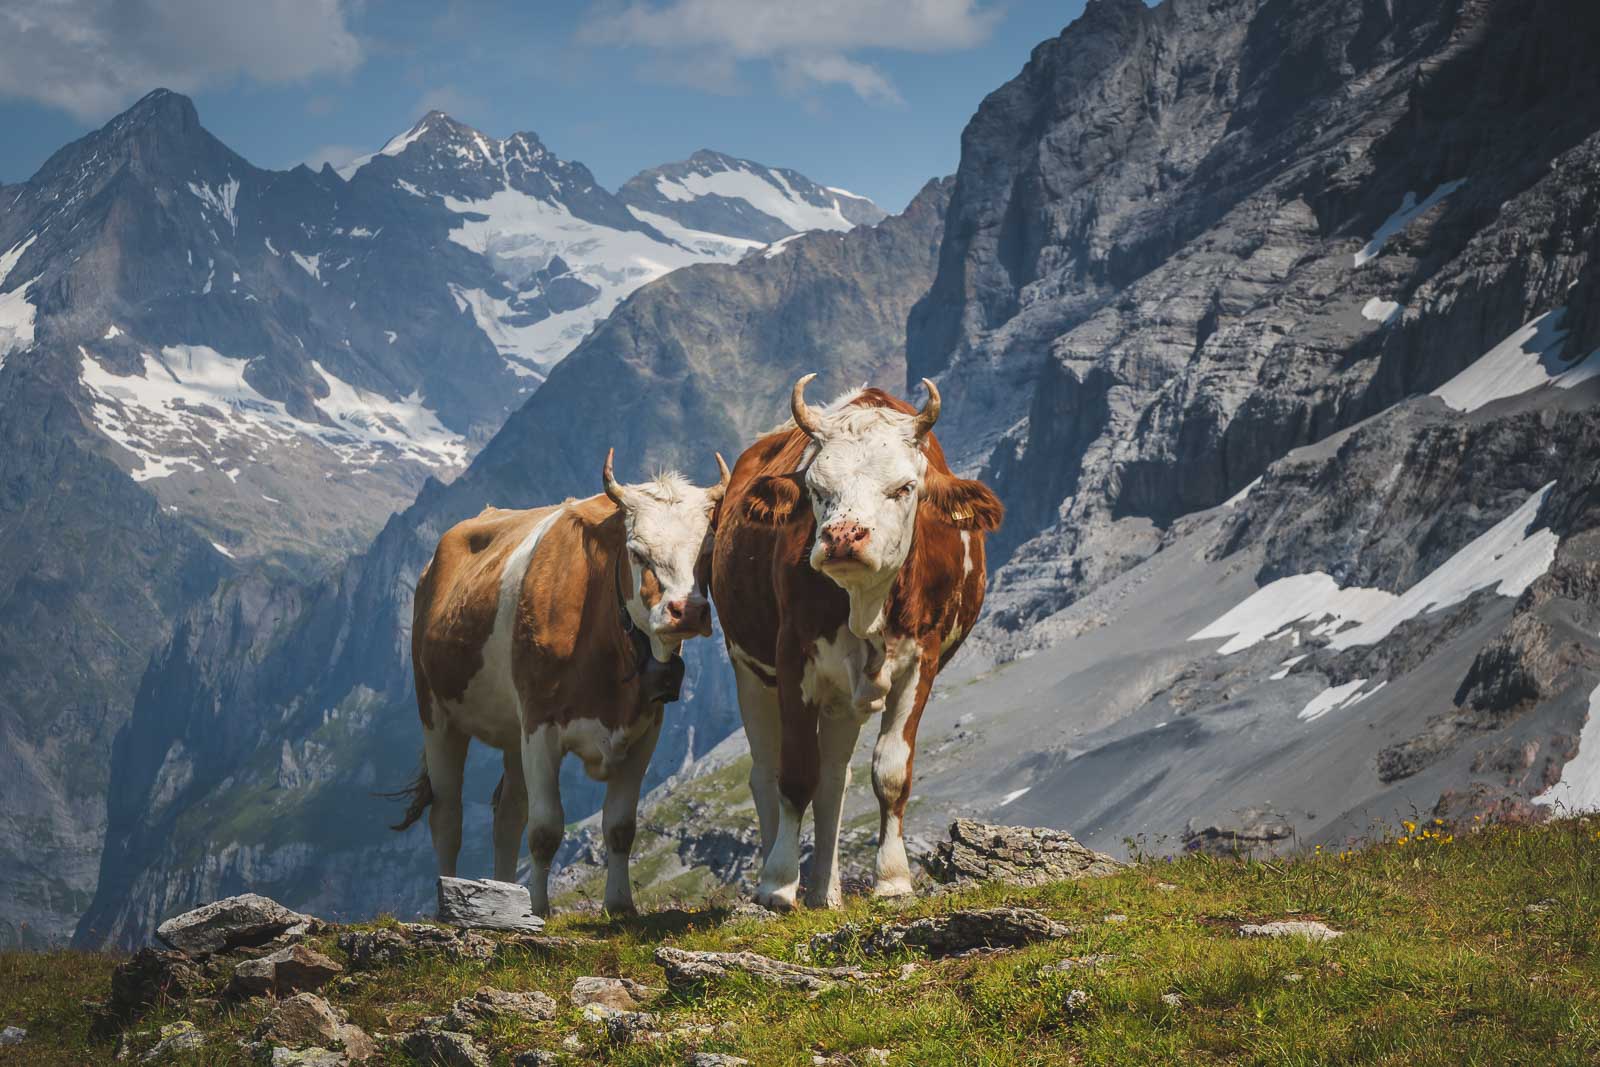 switzerland in photos cows in mountains